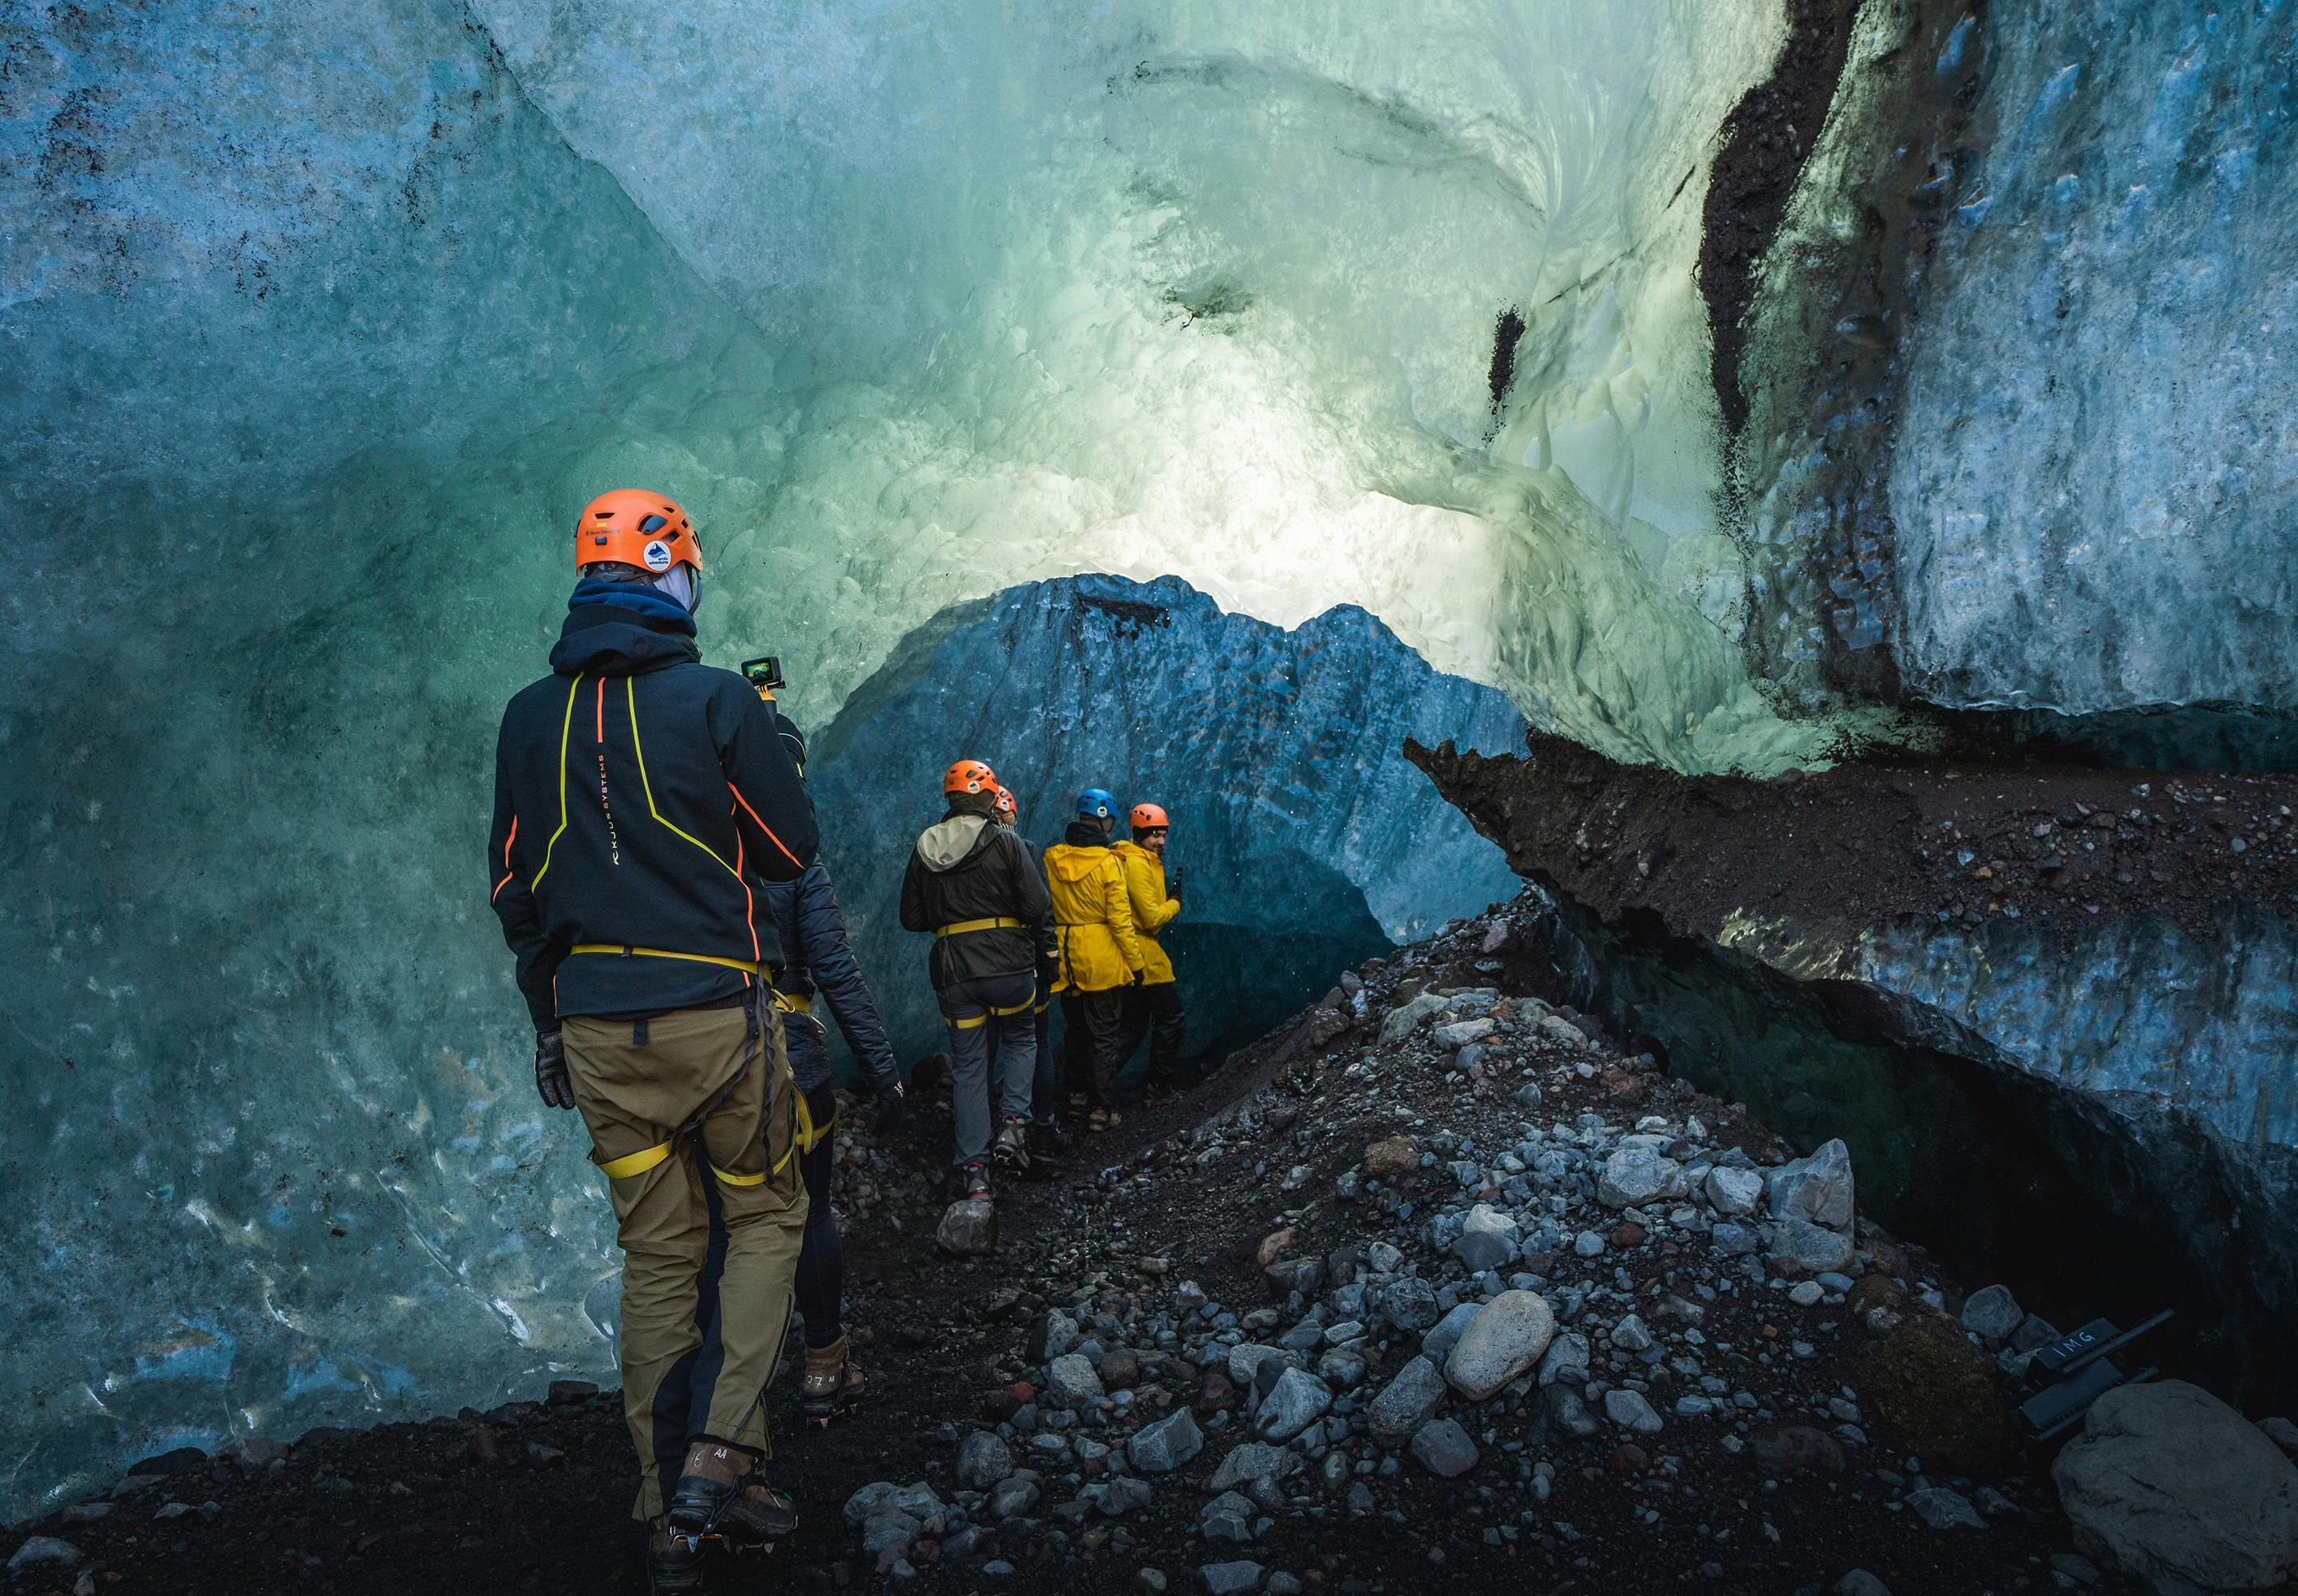 Vatnajökull ice cave tour with a glacier hike